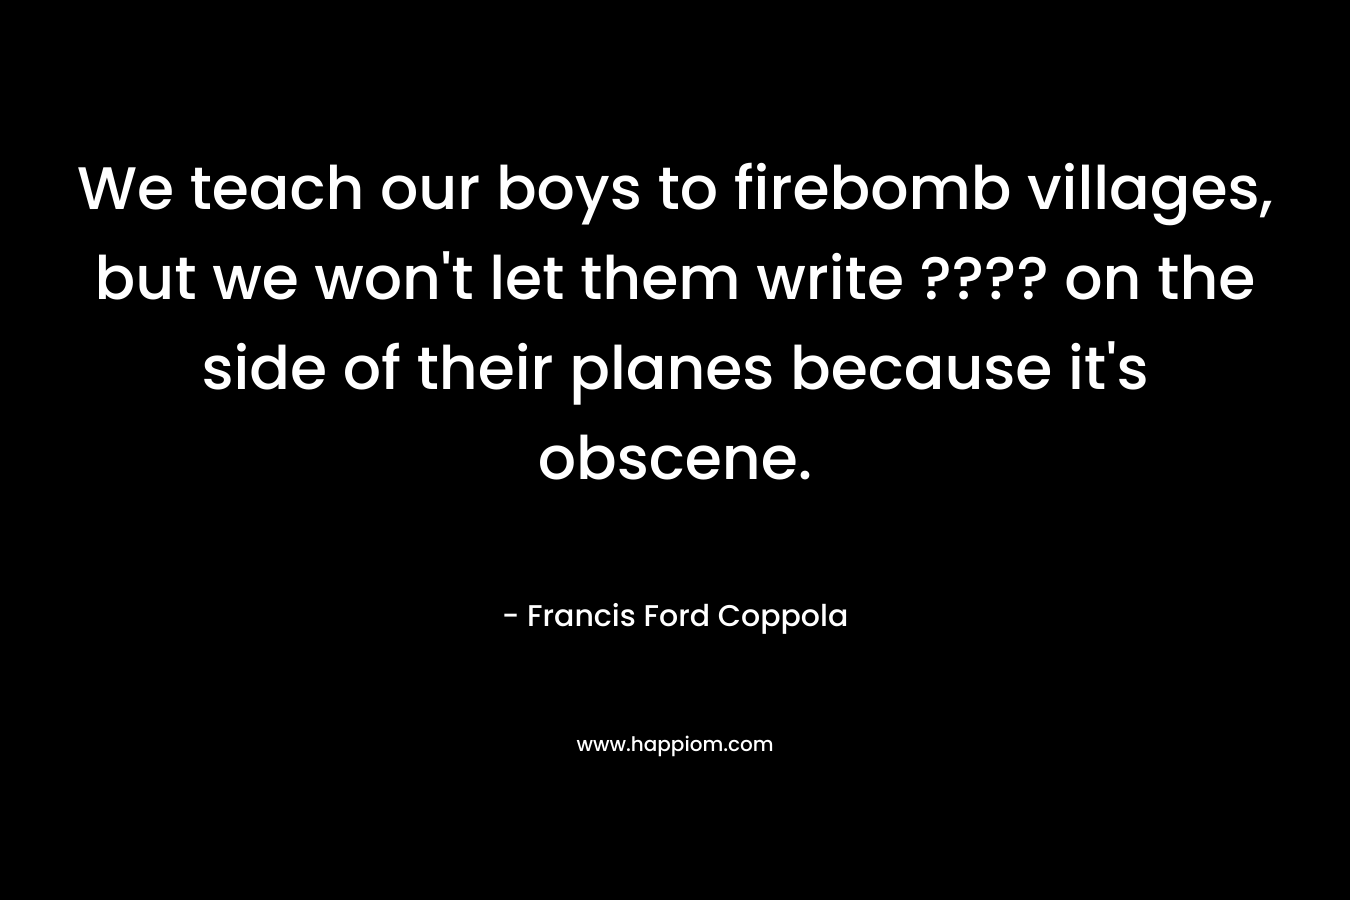 We teach our boys to firebomb villages, but we won’t let them write ???? on the side of their planes because it’s obscene. – Francis Ford Coppola